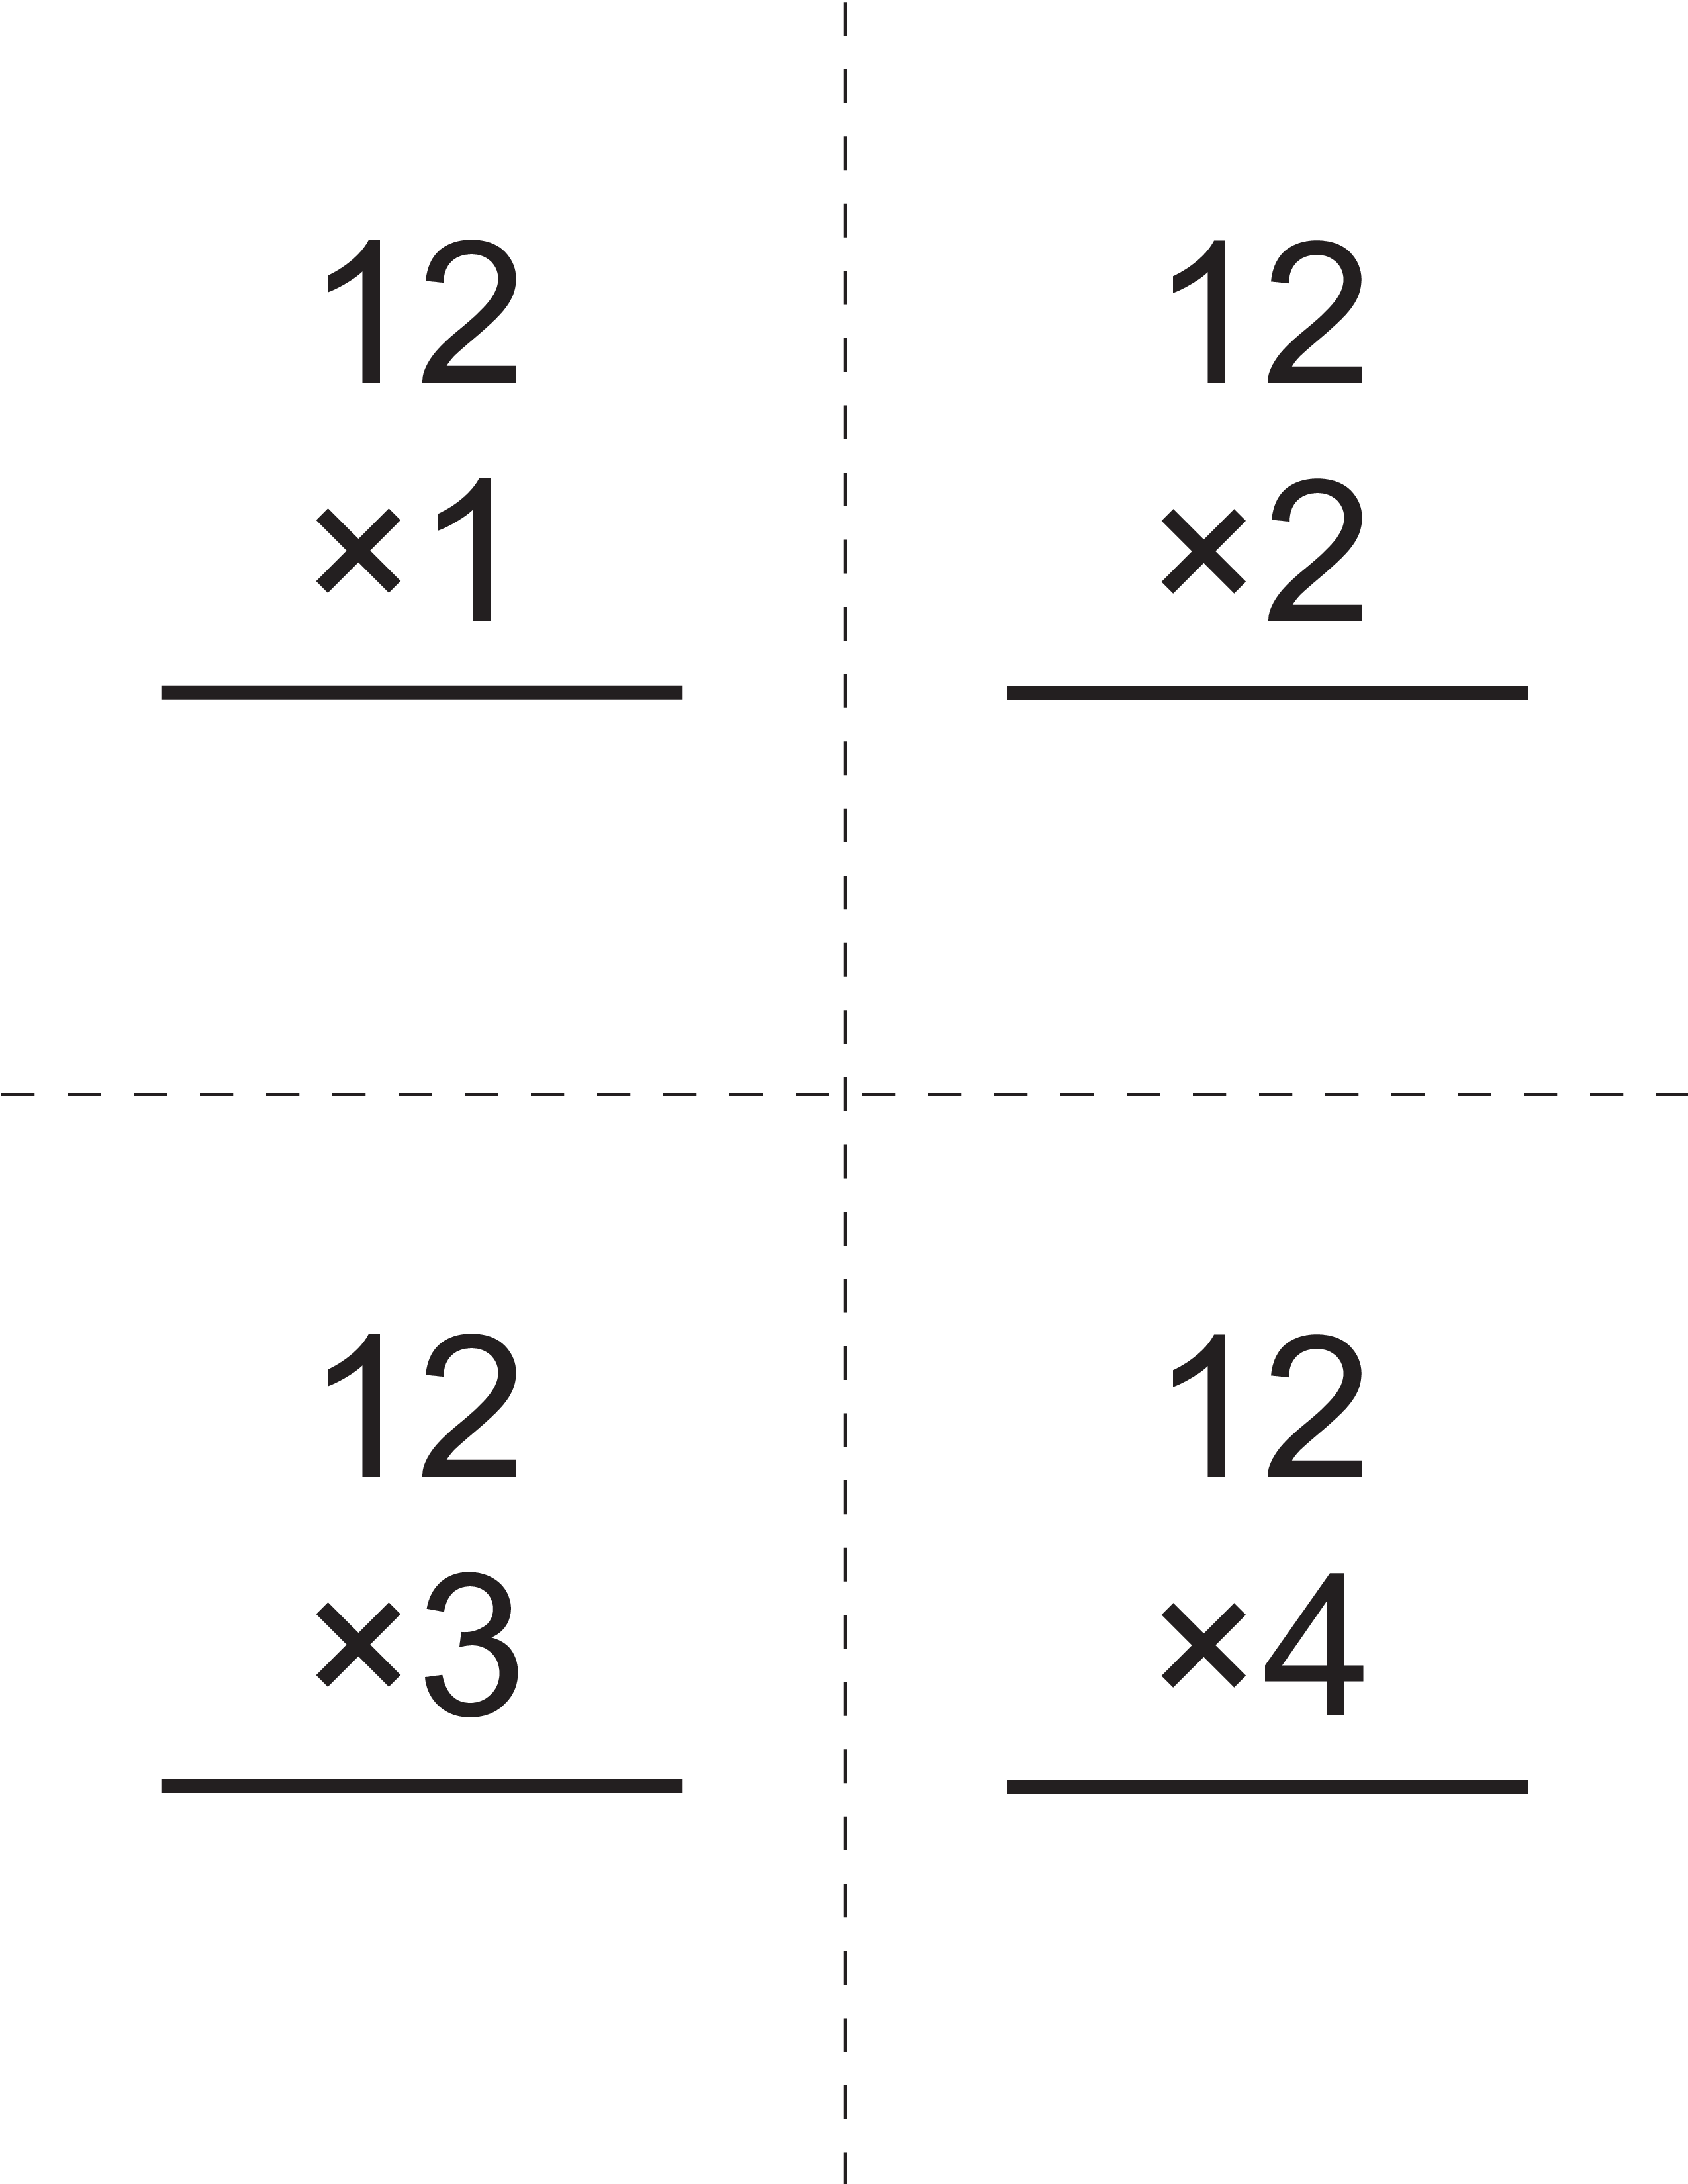 Multiplication Times 12 Flashcards - How To Learn